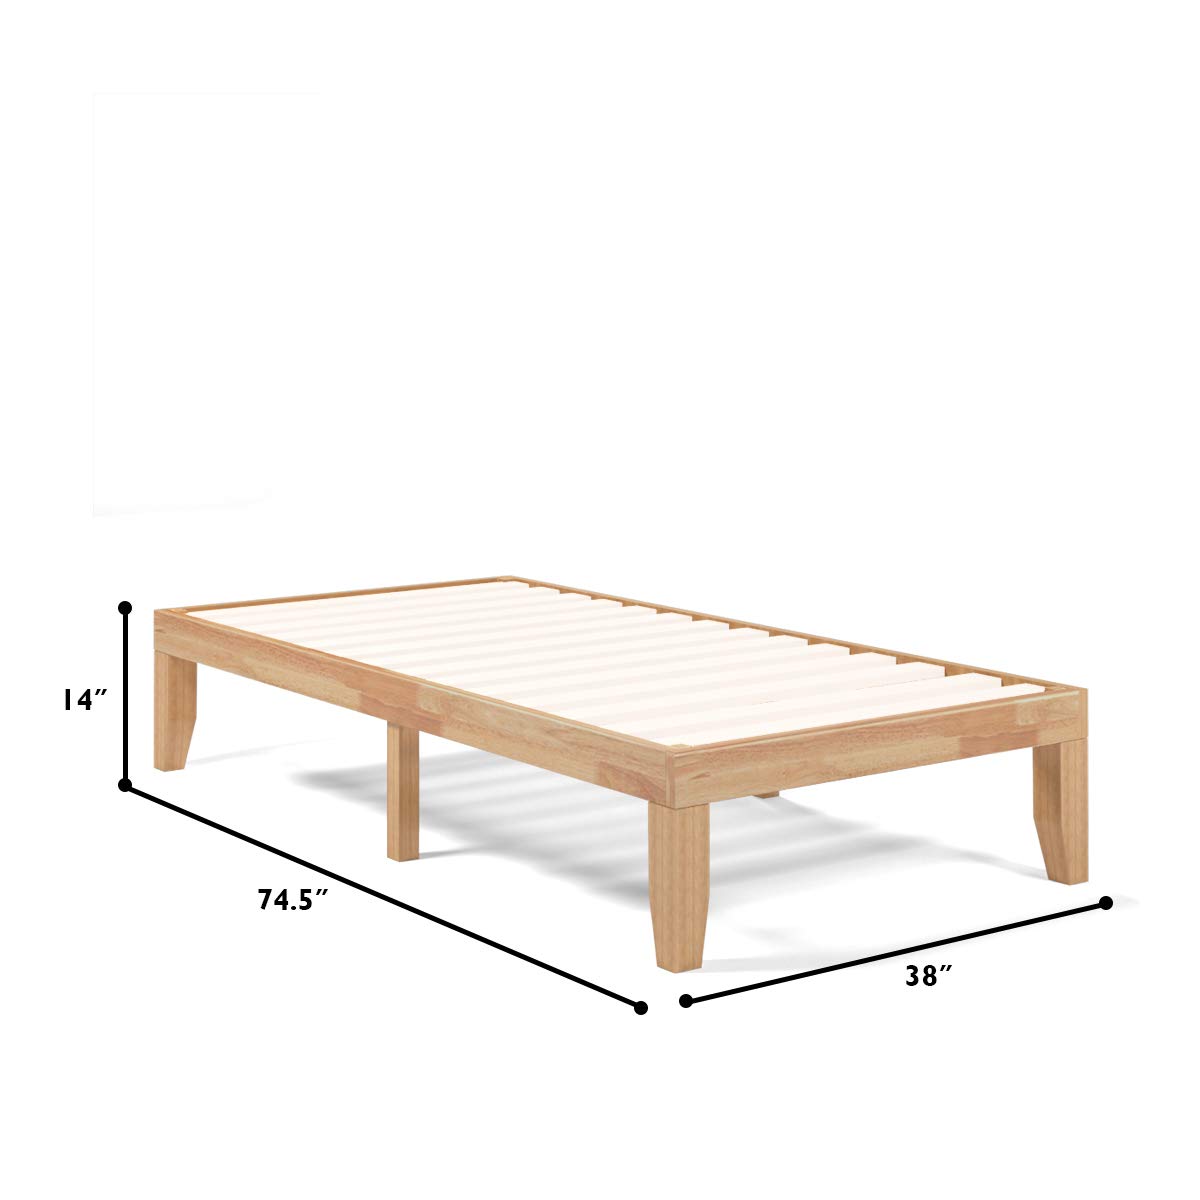 KOMFOTT 14 Inches Wood Platform Bed Frame Twin Size, Solid Wood Mattress Foundation with Rubber Wood Frame, Strong Poplar Wood Slat Support, No Box